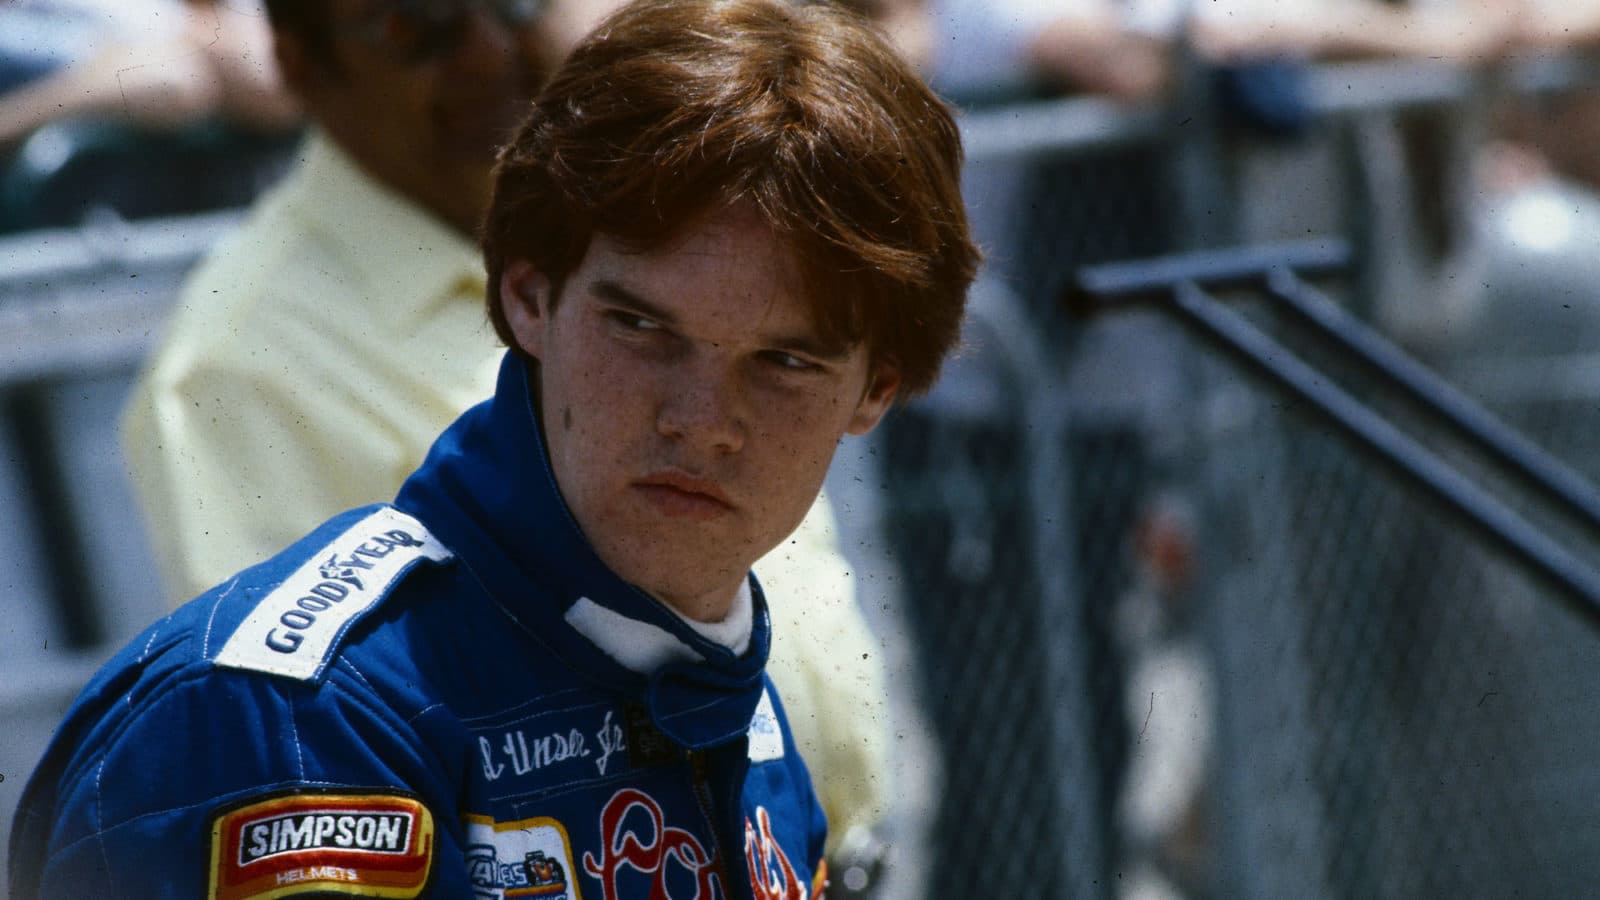 1983- Close-up of Indy 500 race car driver Al Unser Jr, standing alone in front of a crowd at the side of a racetrack. Photo filed 5/14/1983.